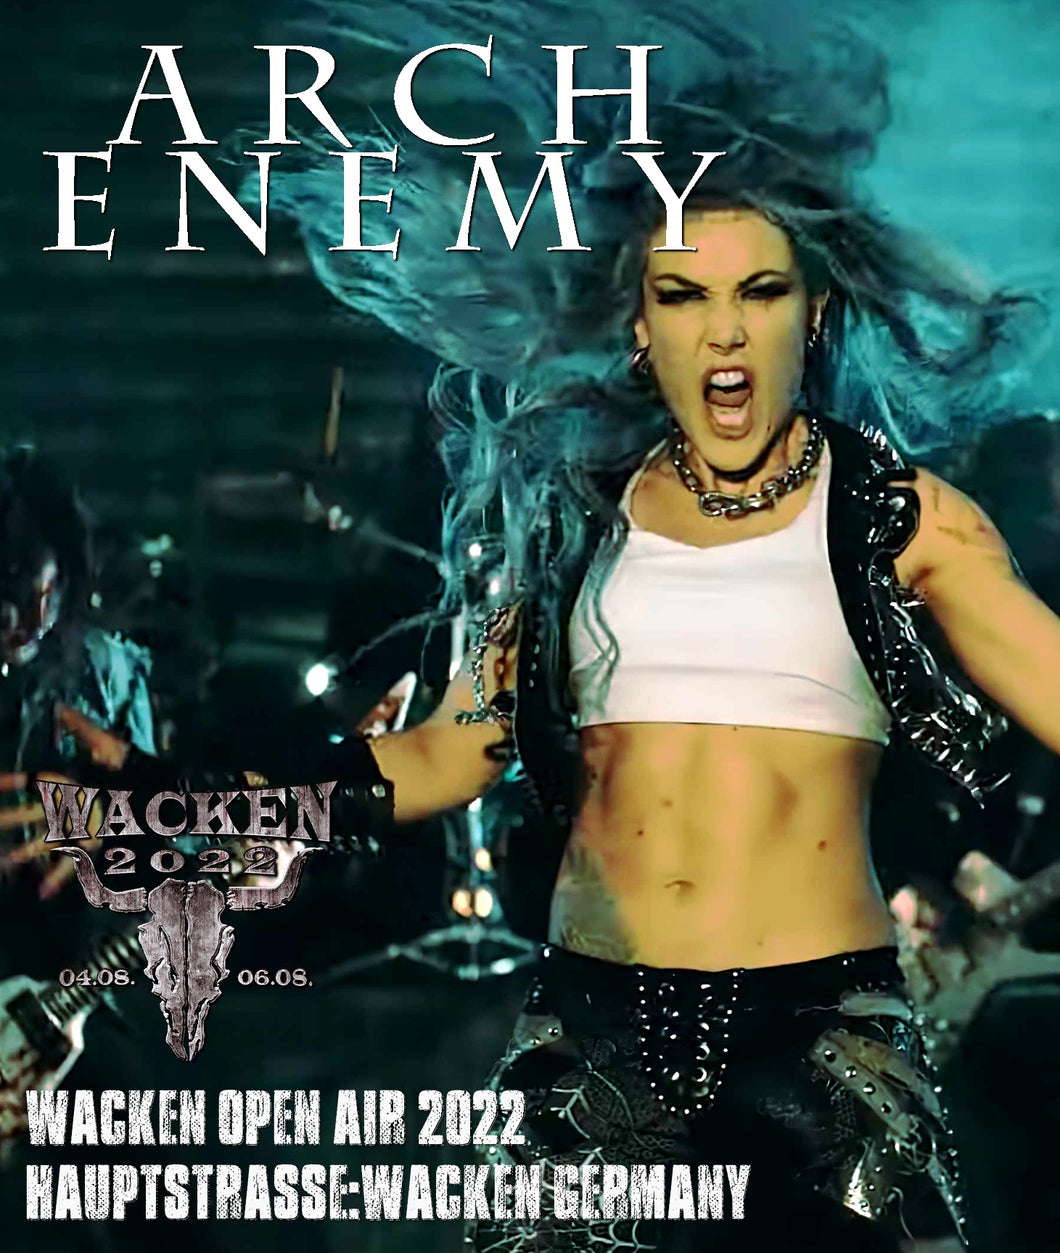 enemy 2022 poster